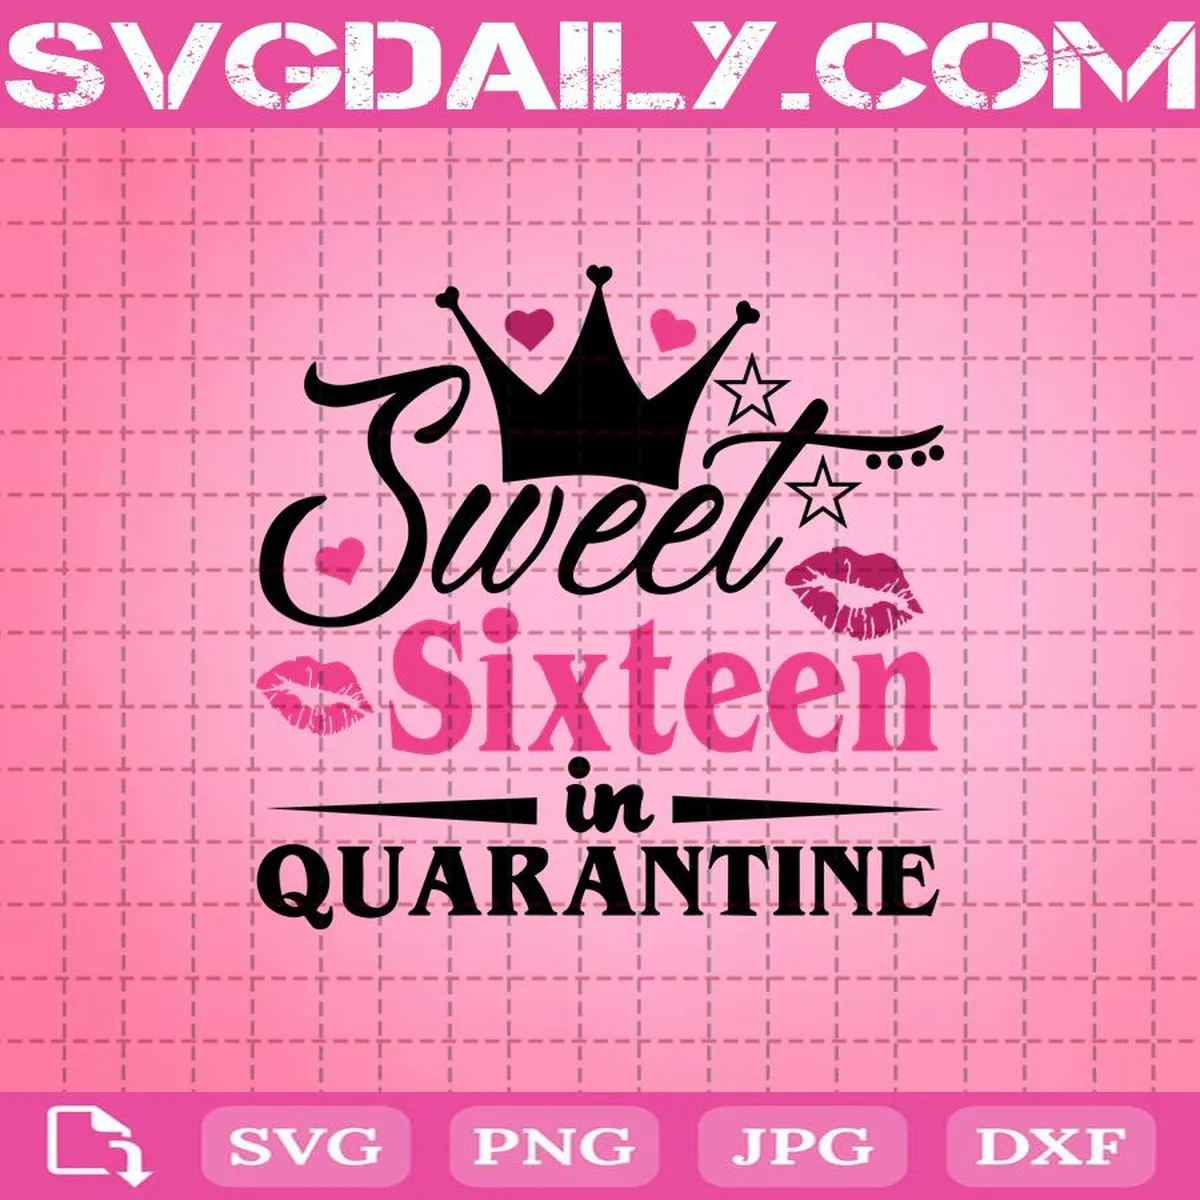 Sweet Sixteen In Quarantine Covid 19 Svg, Sweet Sixteen Svg, Birthday Svg, Quarantine Birthday Svg, Svg Png Dxf Eps Download Files